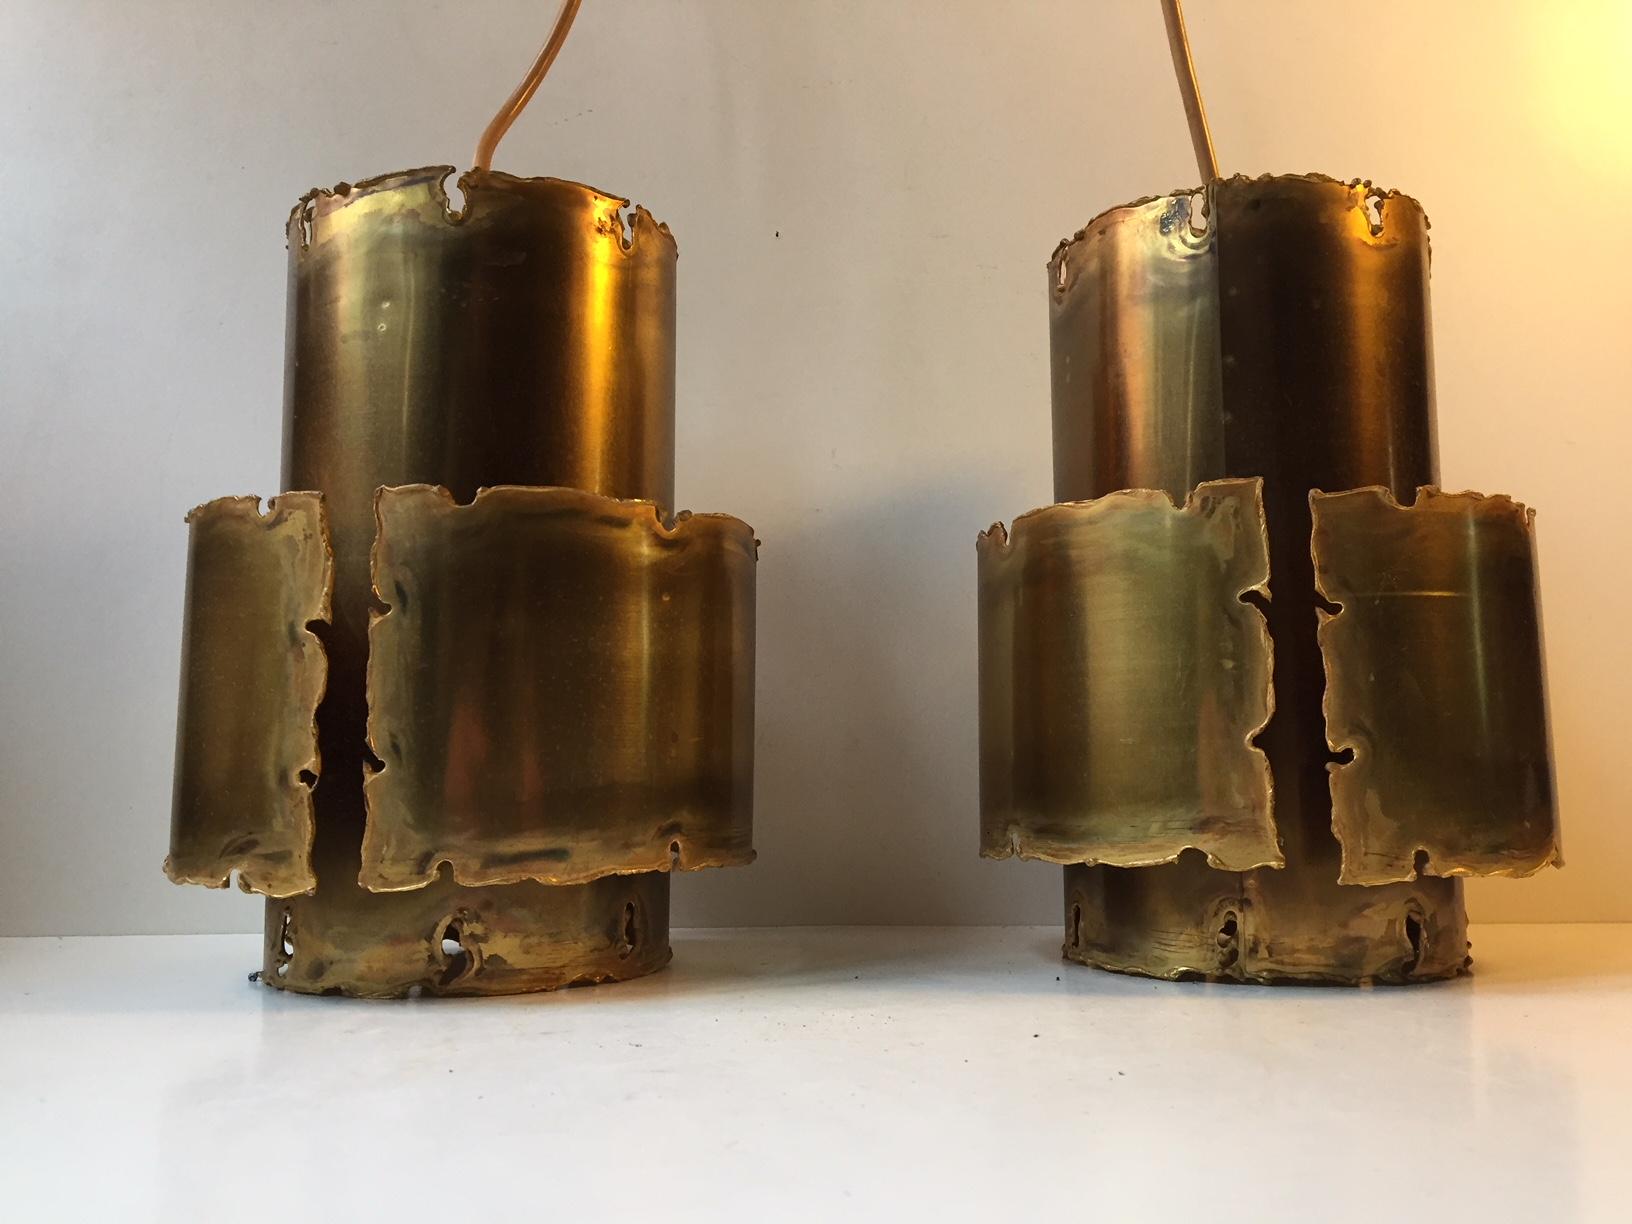 Mid-Century Modern Brutalist Torch Cut Brass Ceiling Lamps by Svend Aage Holm Sørensen, 1960s For Sale